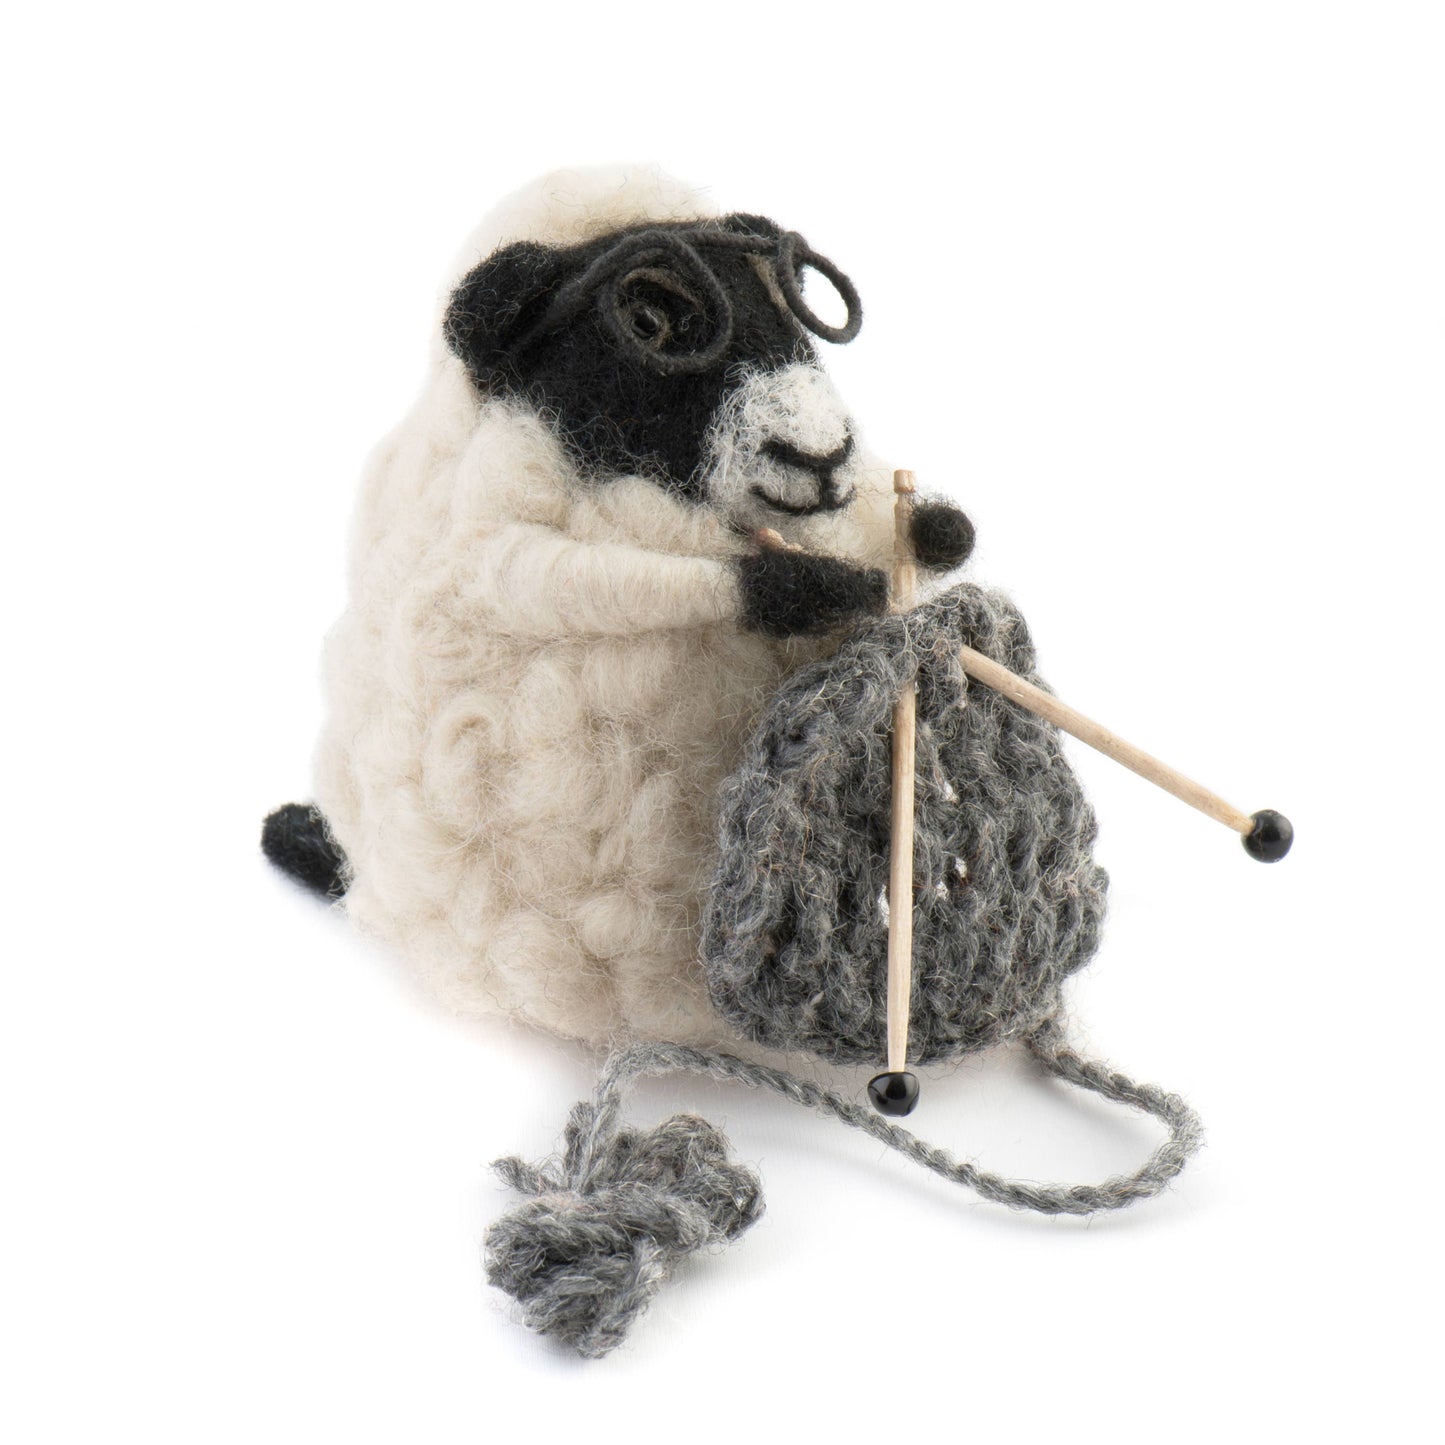 Knitting Sheep from Woolacombe